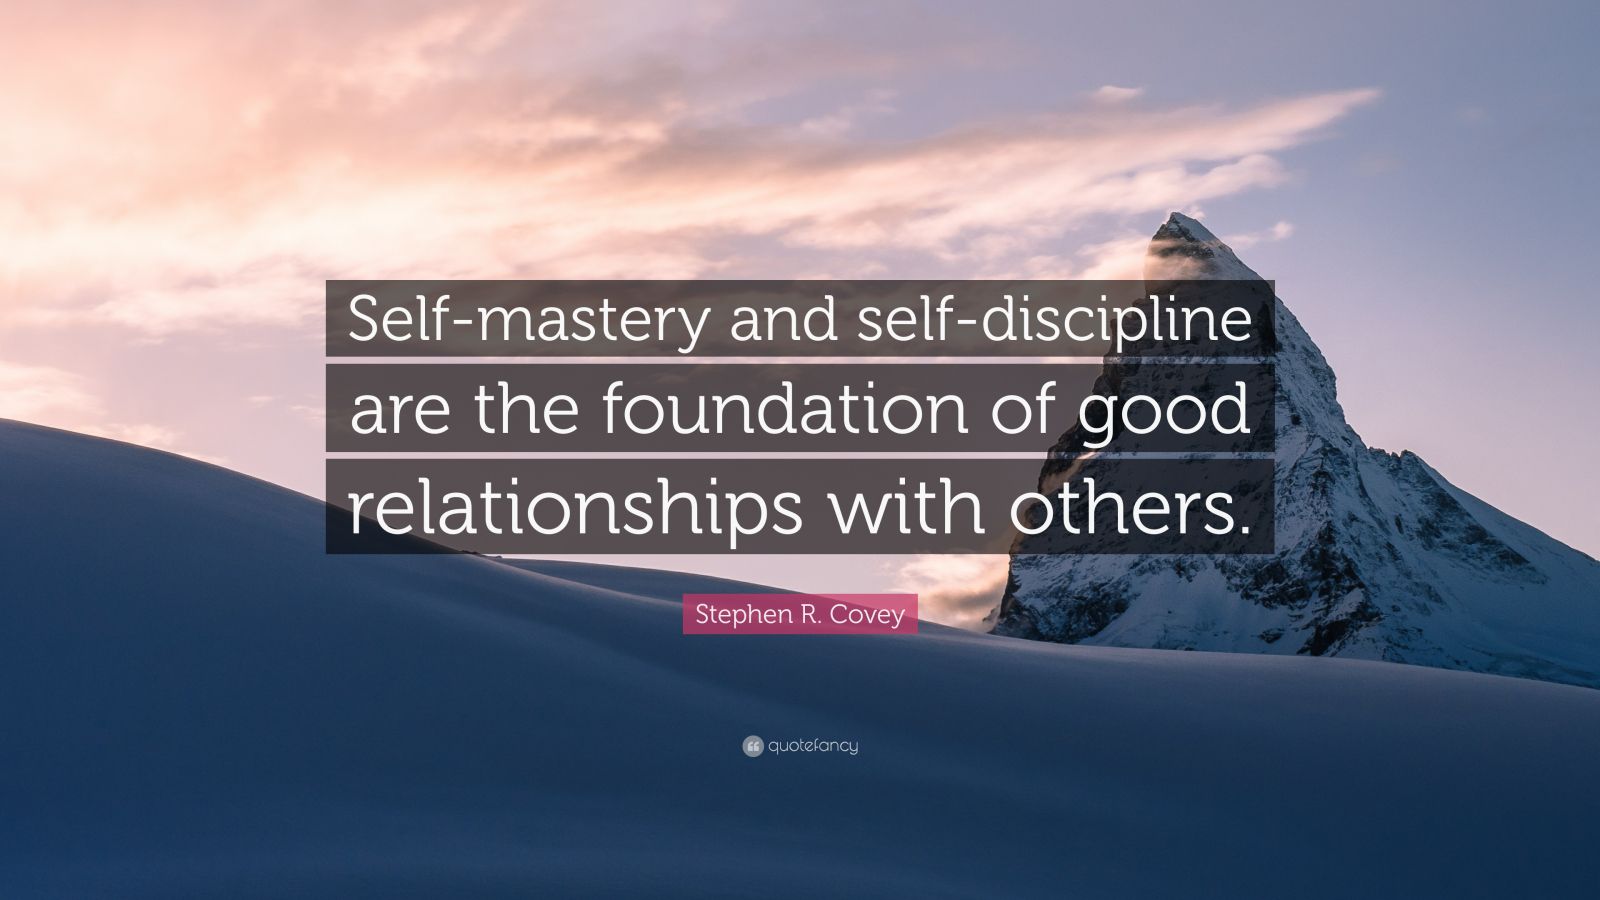 Stephen R. Covey Quote: “Self-mastery and self-discipline are the